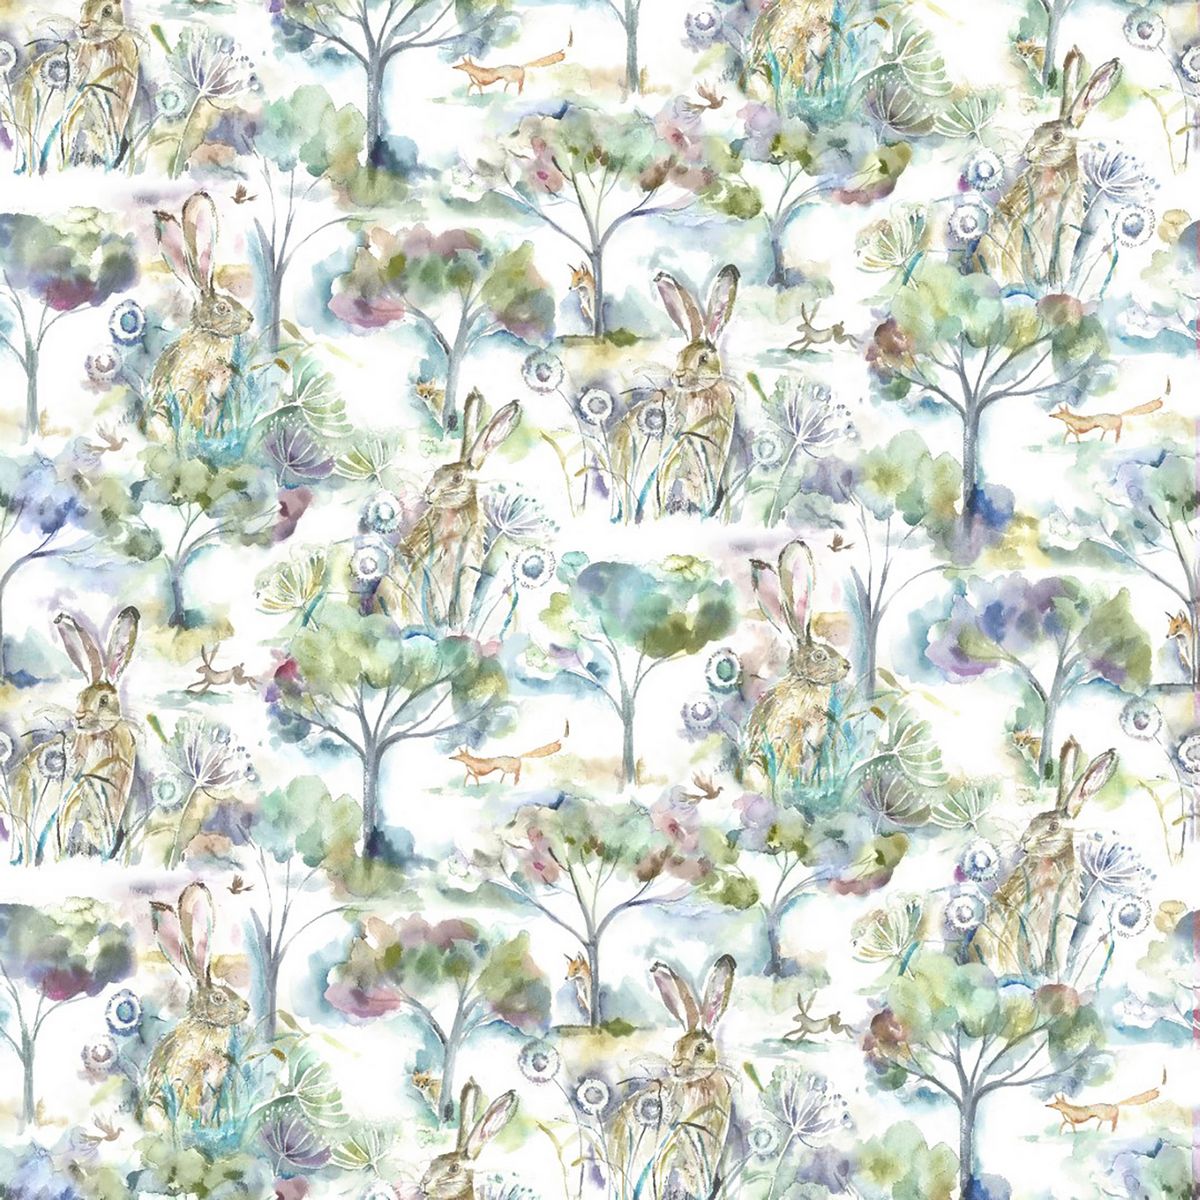 Grassmere Sweetpea Fabric by Voyage Maison